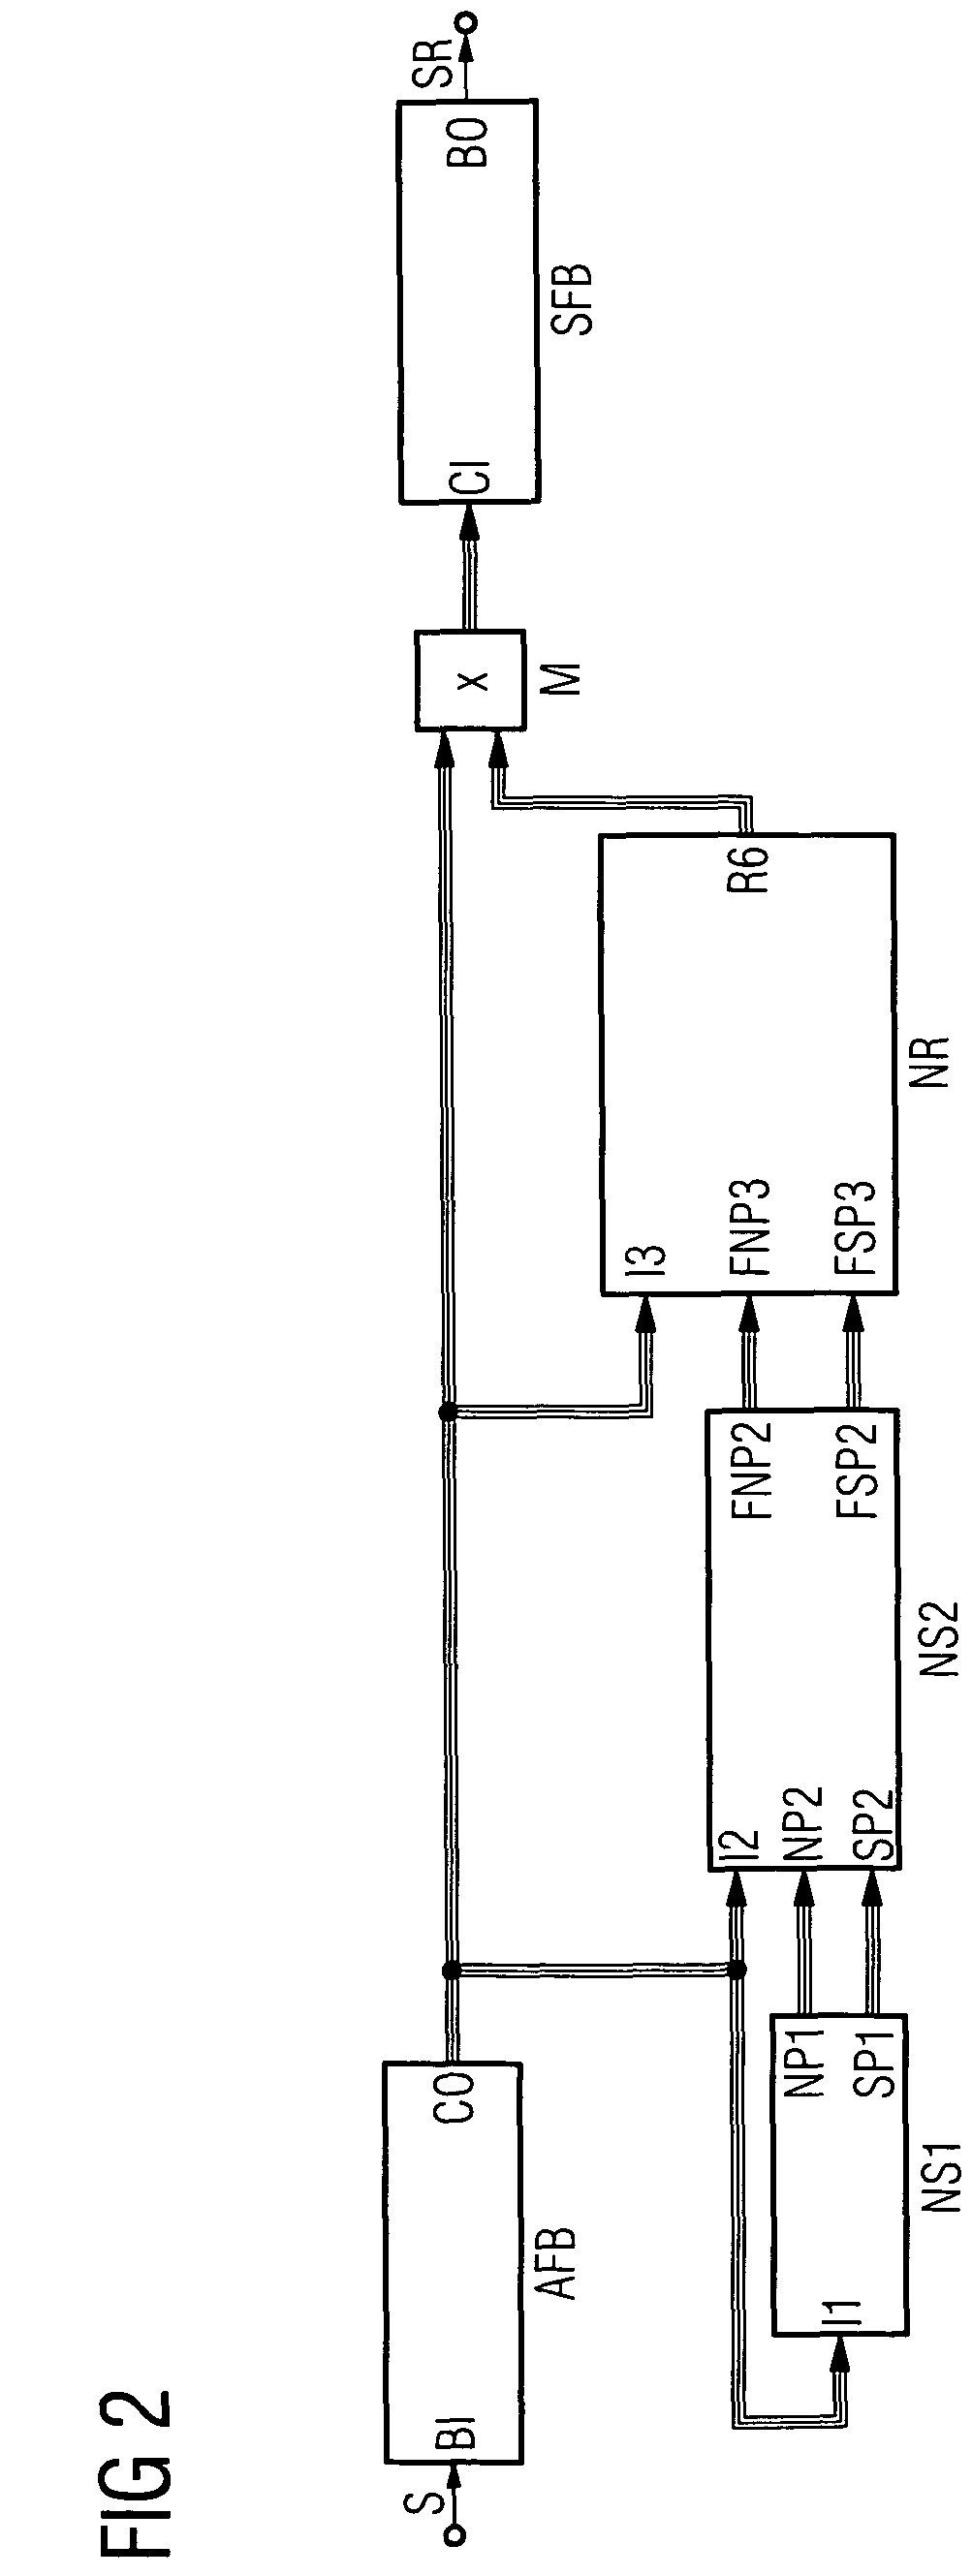 Multi-stage estimation method for noise reduction and hearing apparatus